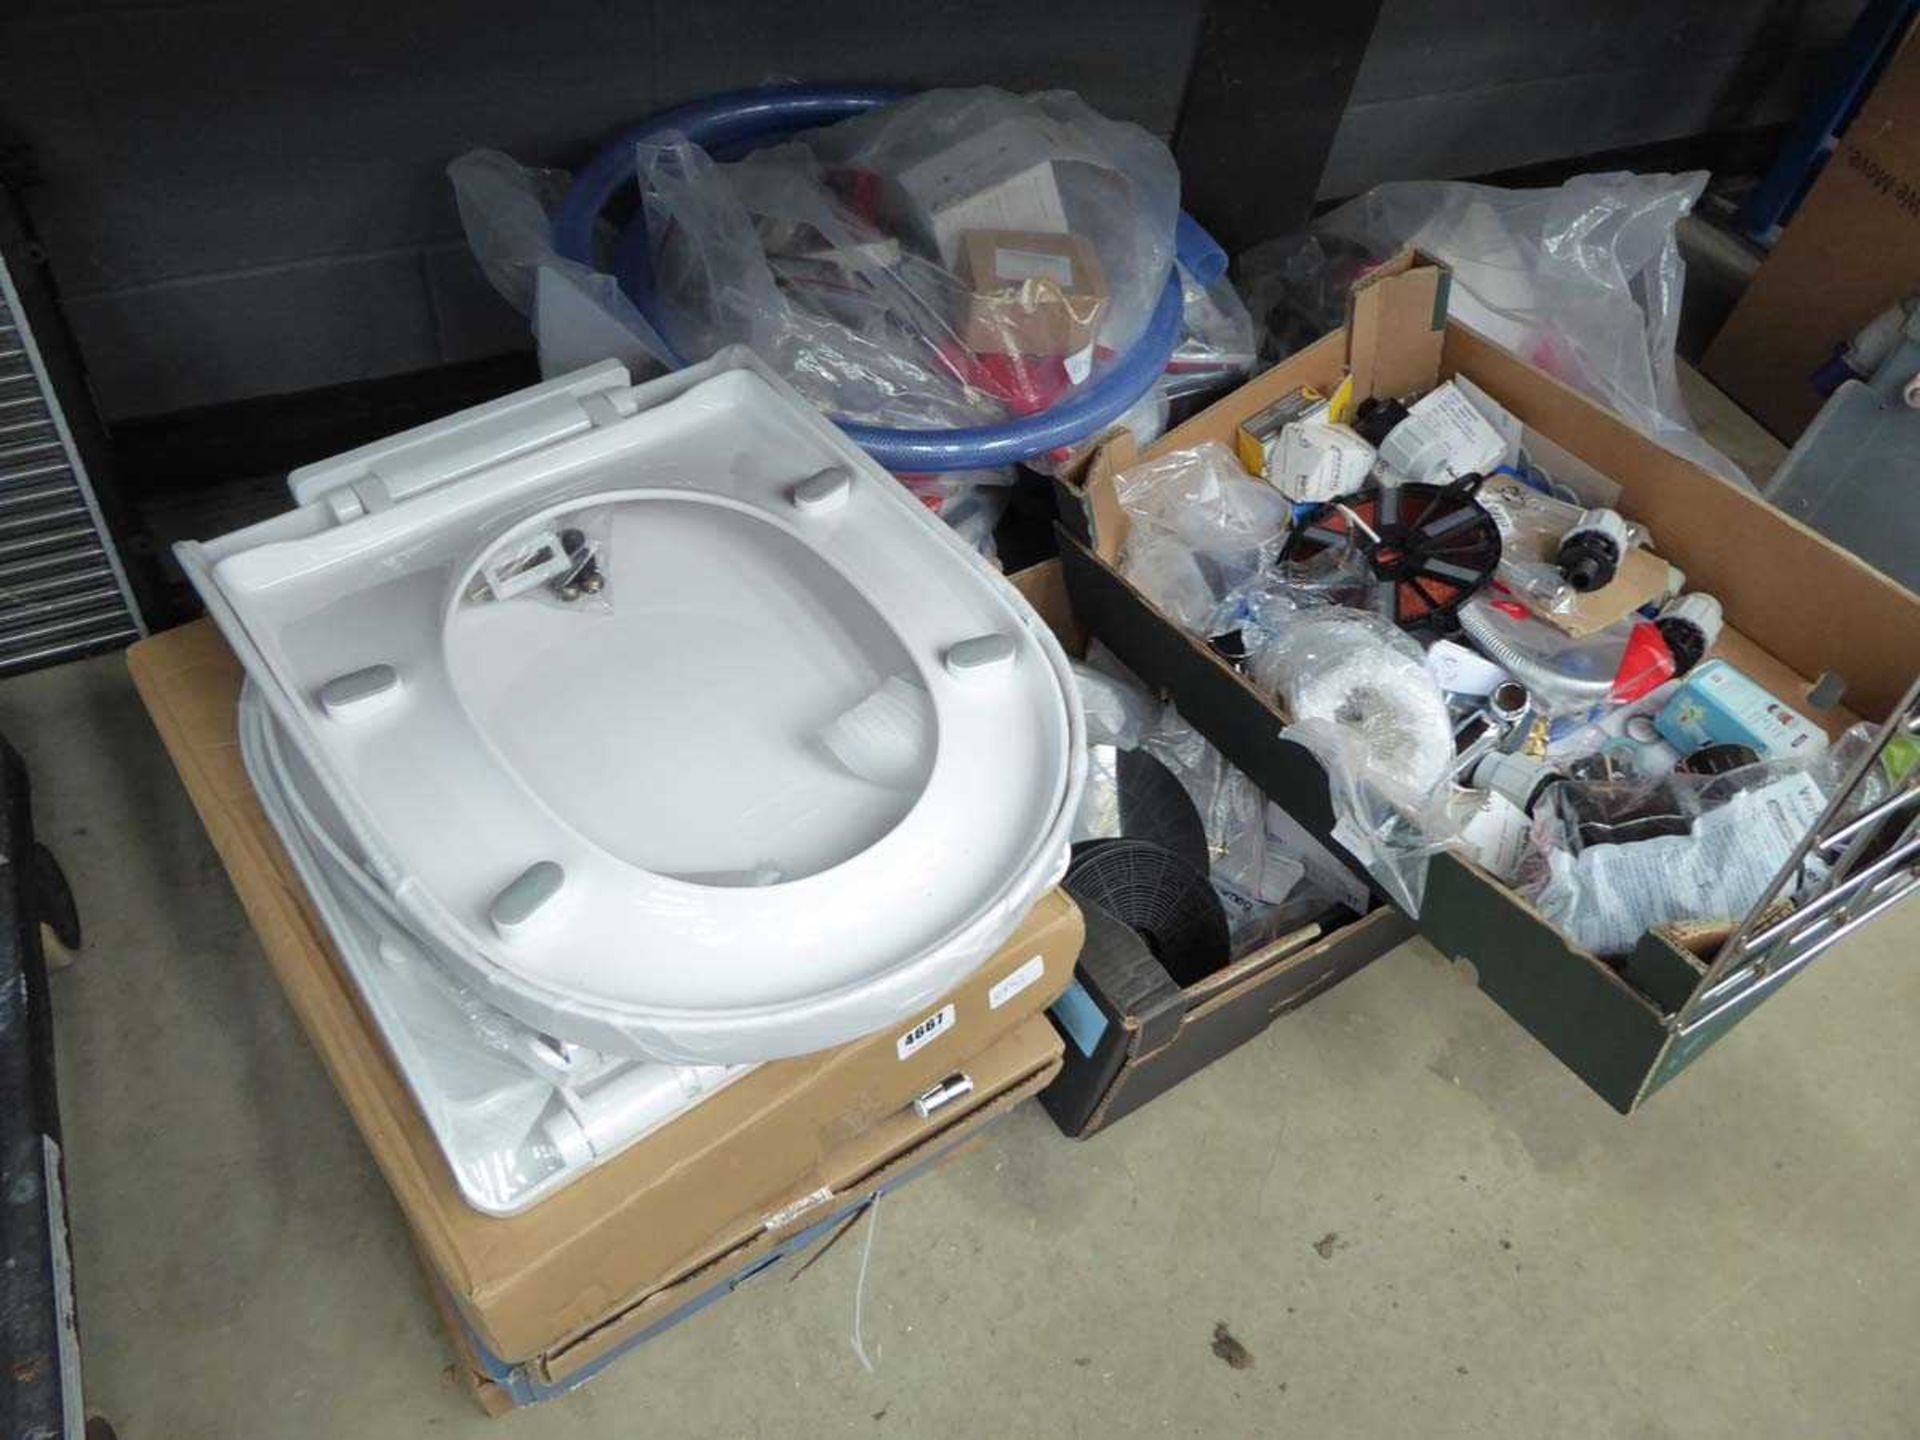 Quarter of an under bay containing toilet seats, filters, plumbing items, pipes, etc